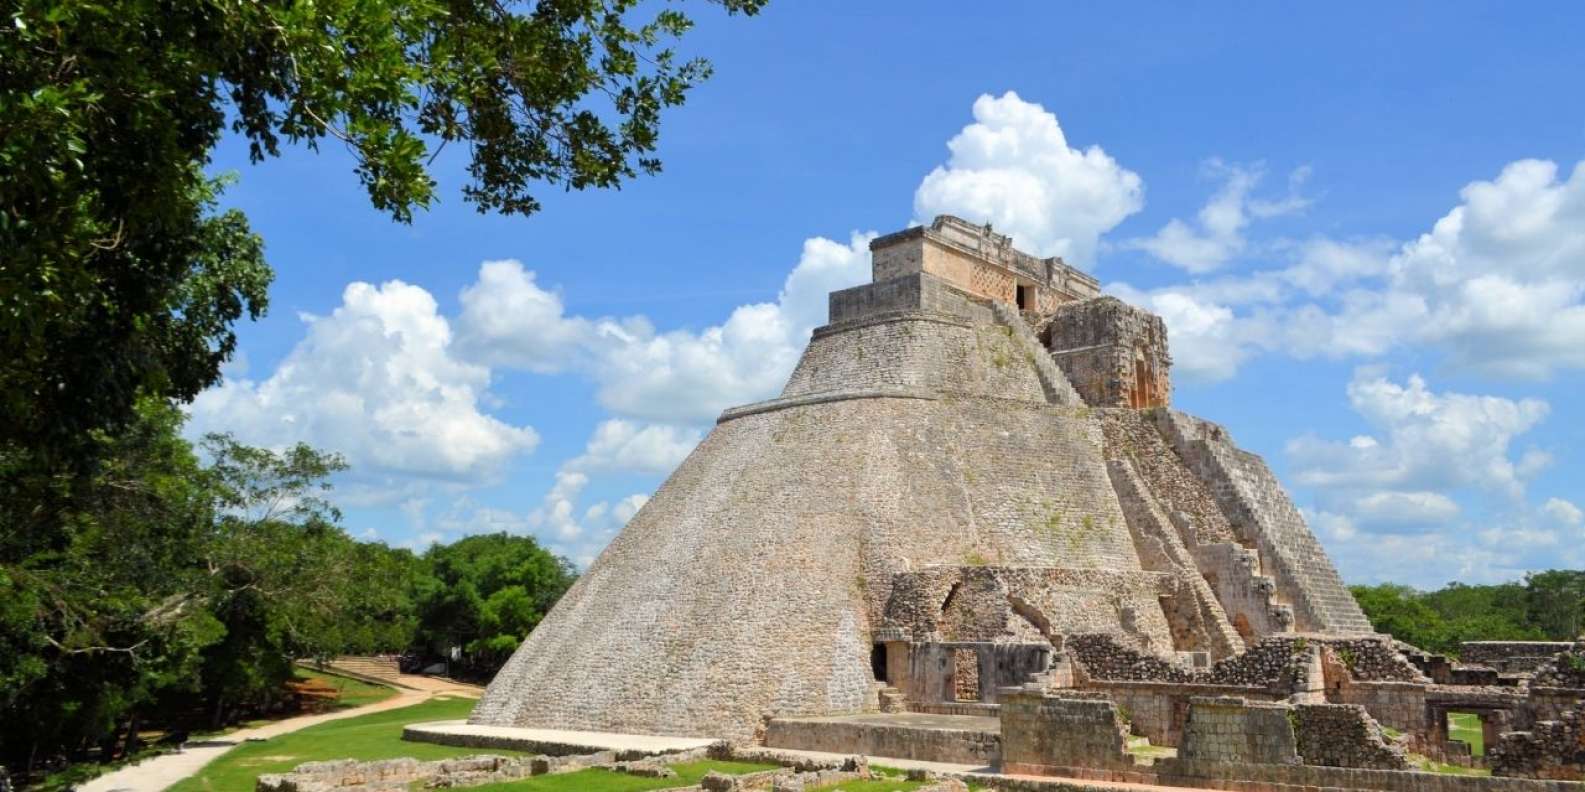 What to do in Uxmal